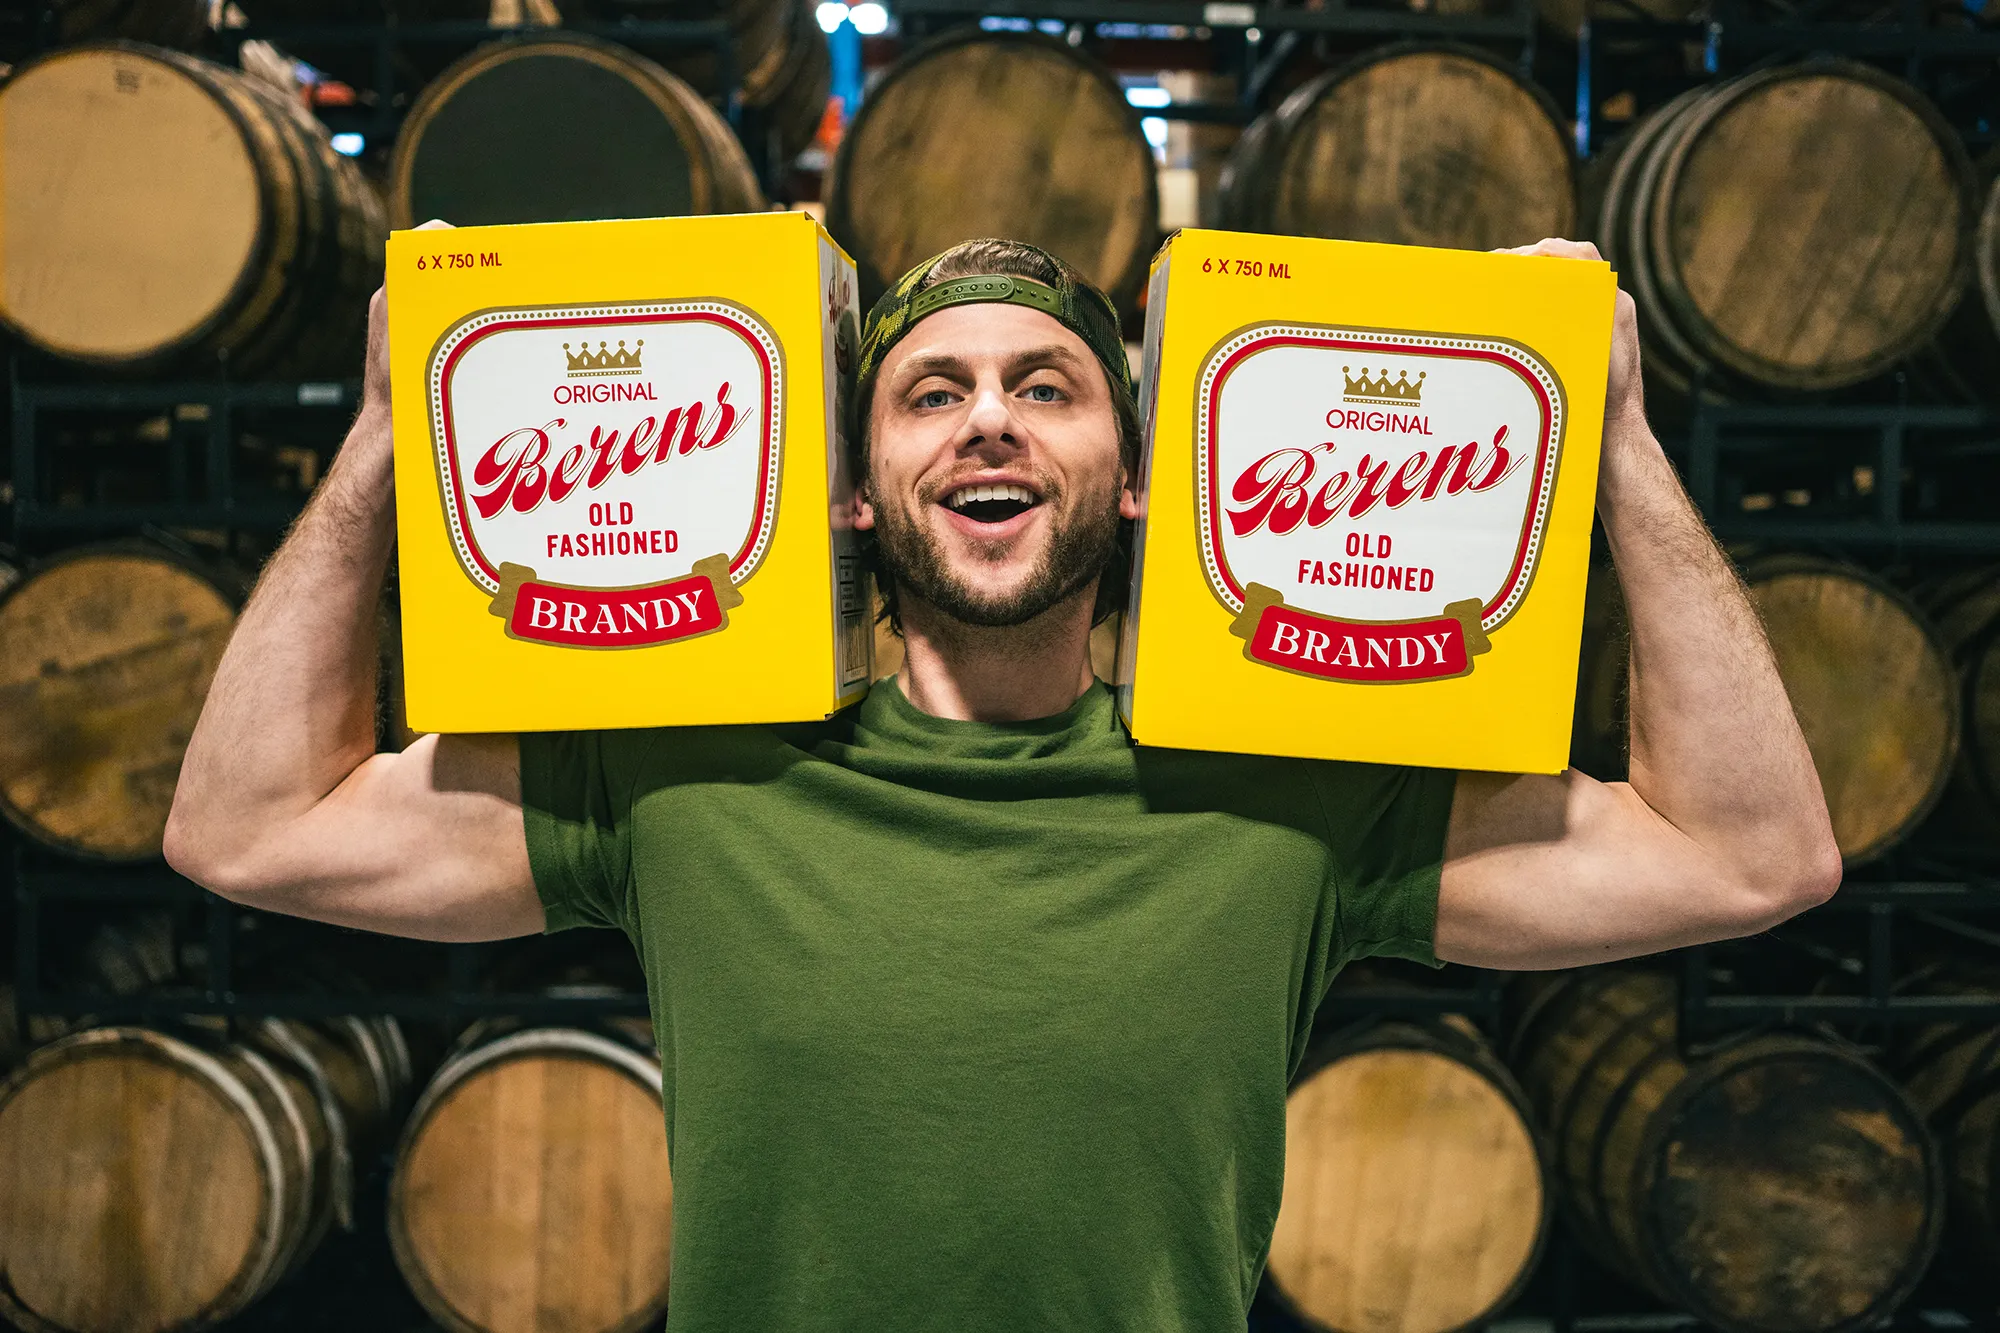 Charlie Berens holding cases of Berens Old Fashioned Brandy